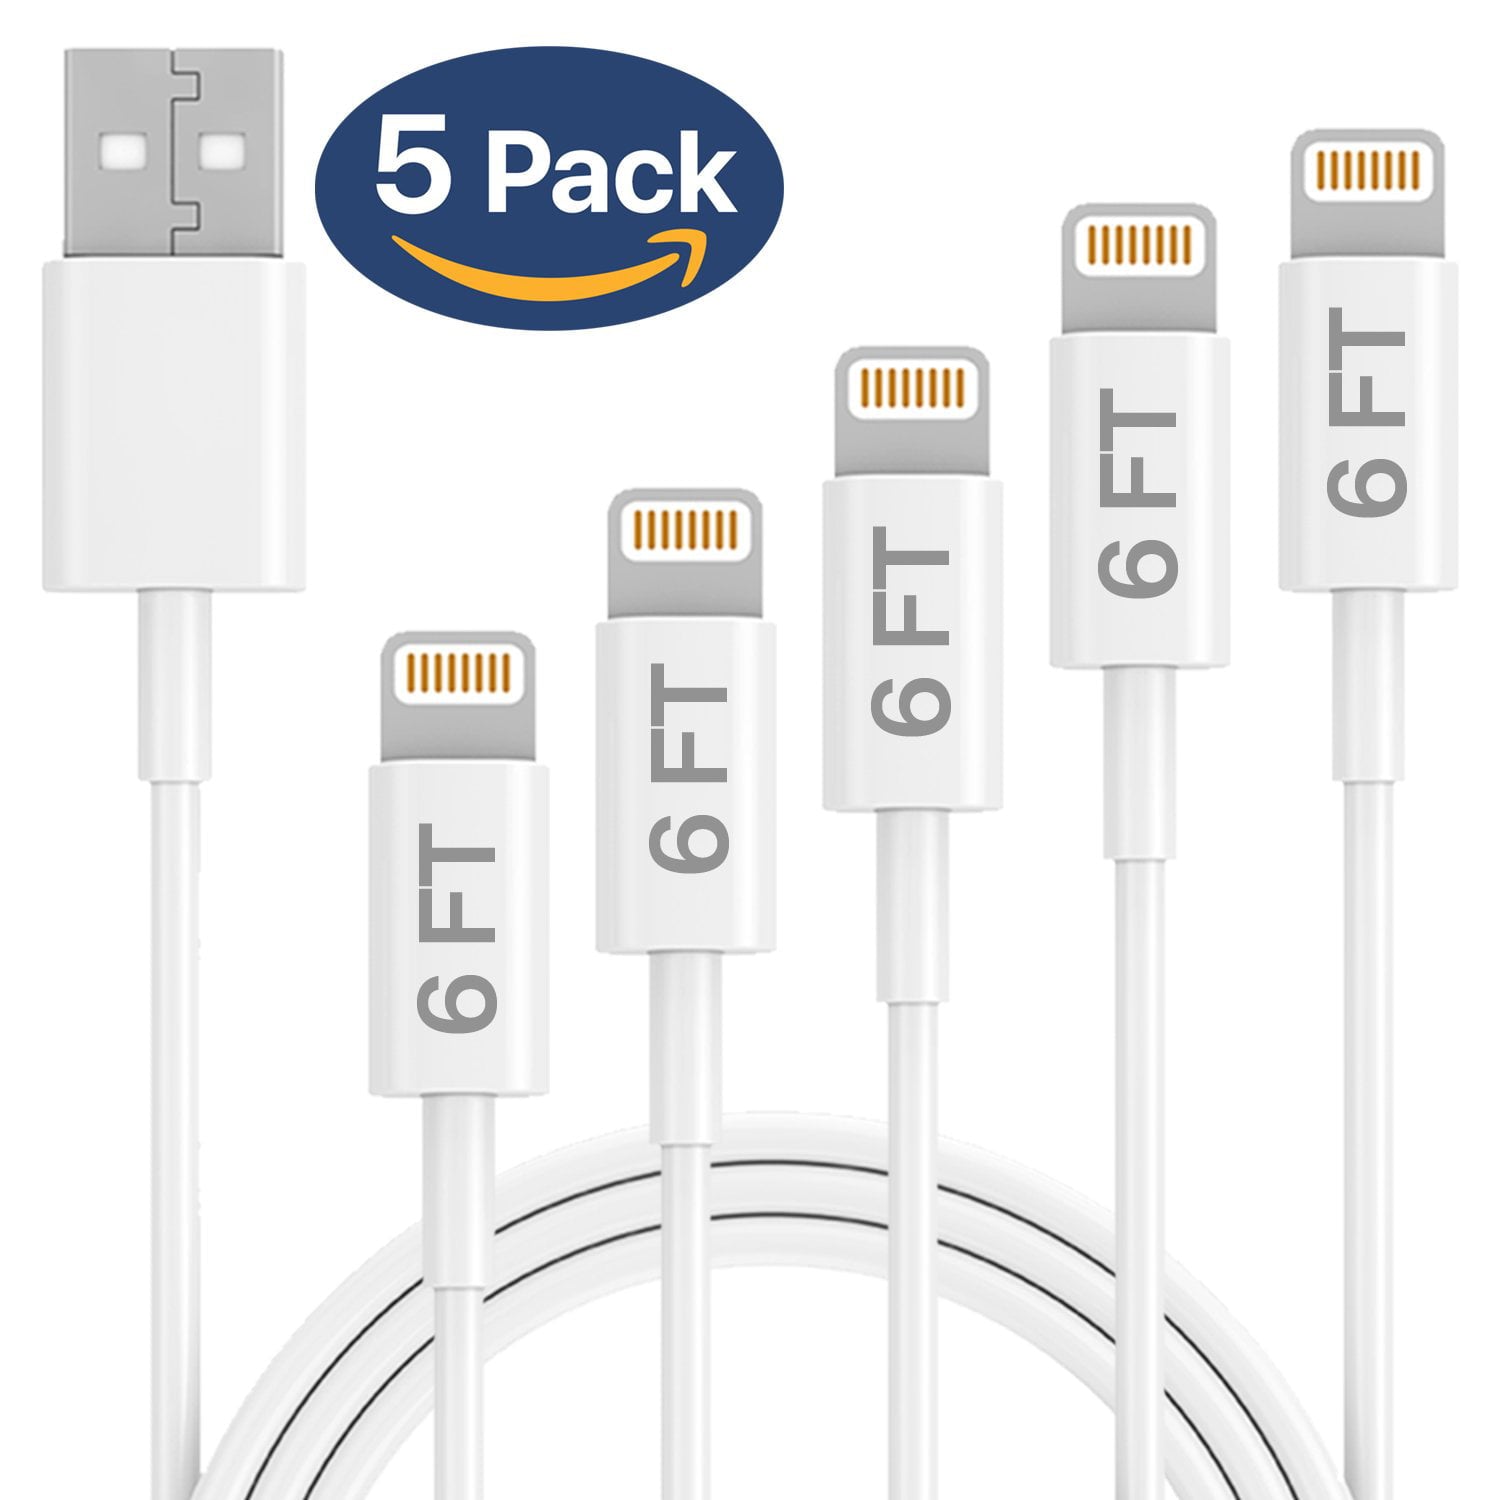 Iric Stable Transmission and High Durable MFI Certified Aple USB to lightning Charging Cable 6 Ft., 5 Pack Set (White)